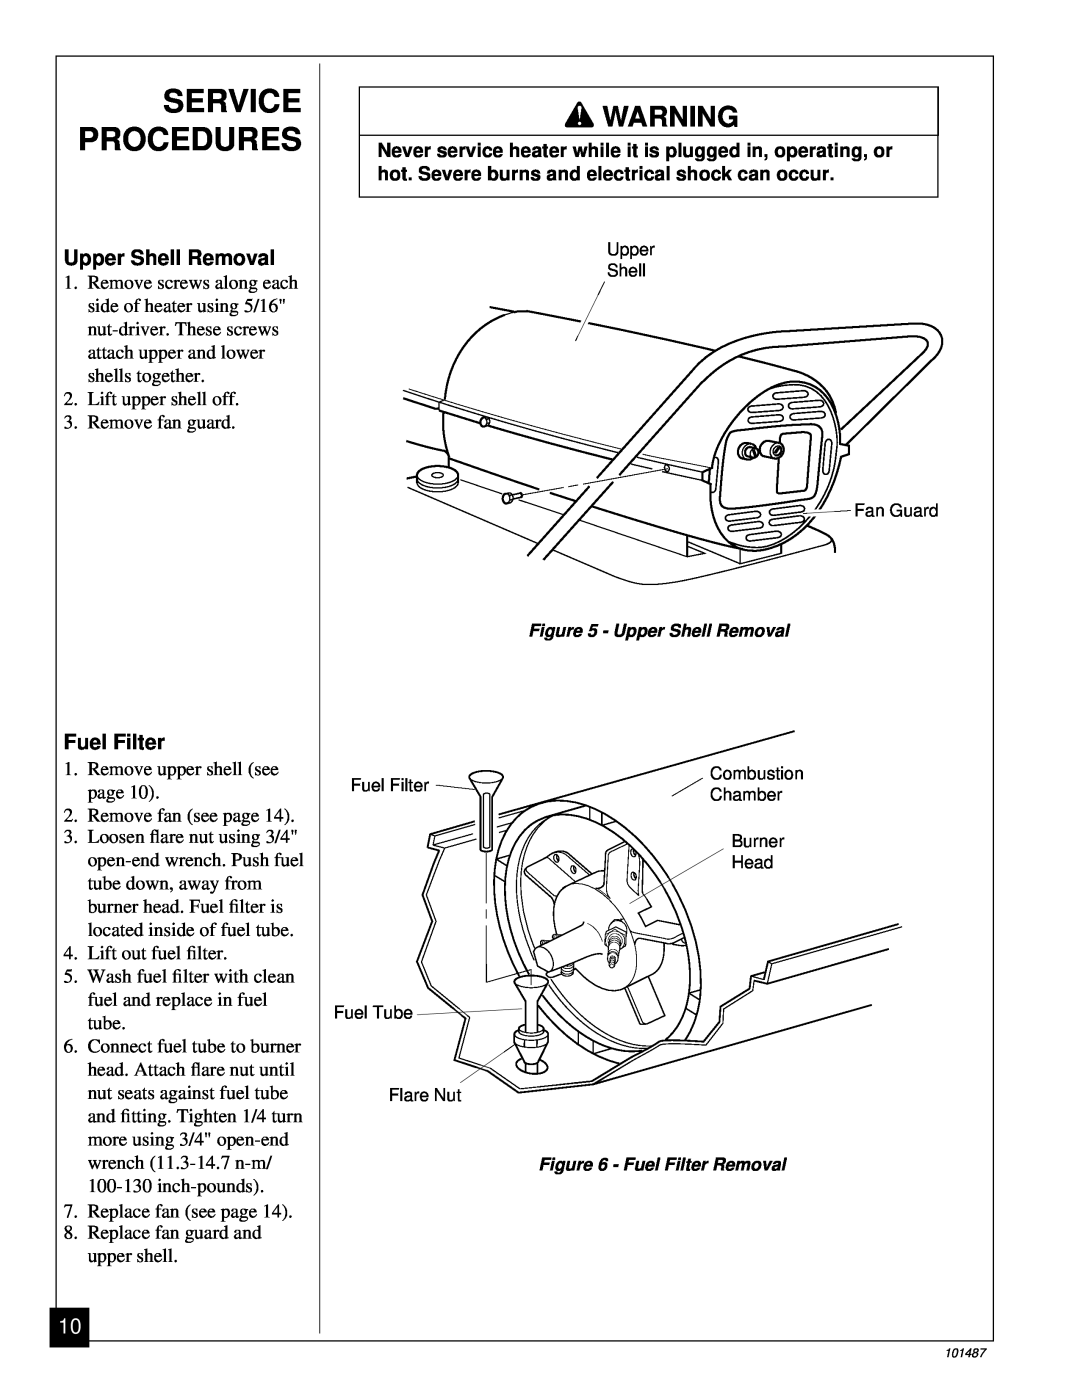 Master Lock BH150CE owner manual Service Procedures, Upper Shell Removal, Fuel Filter 